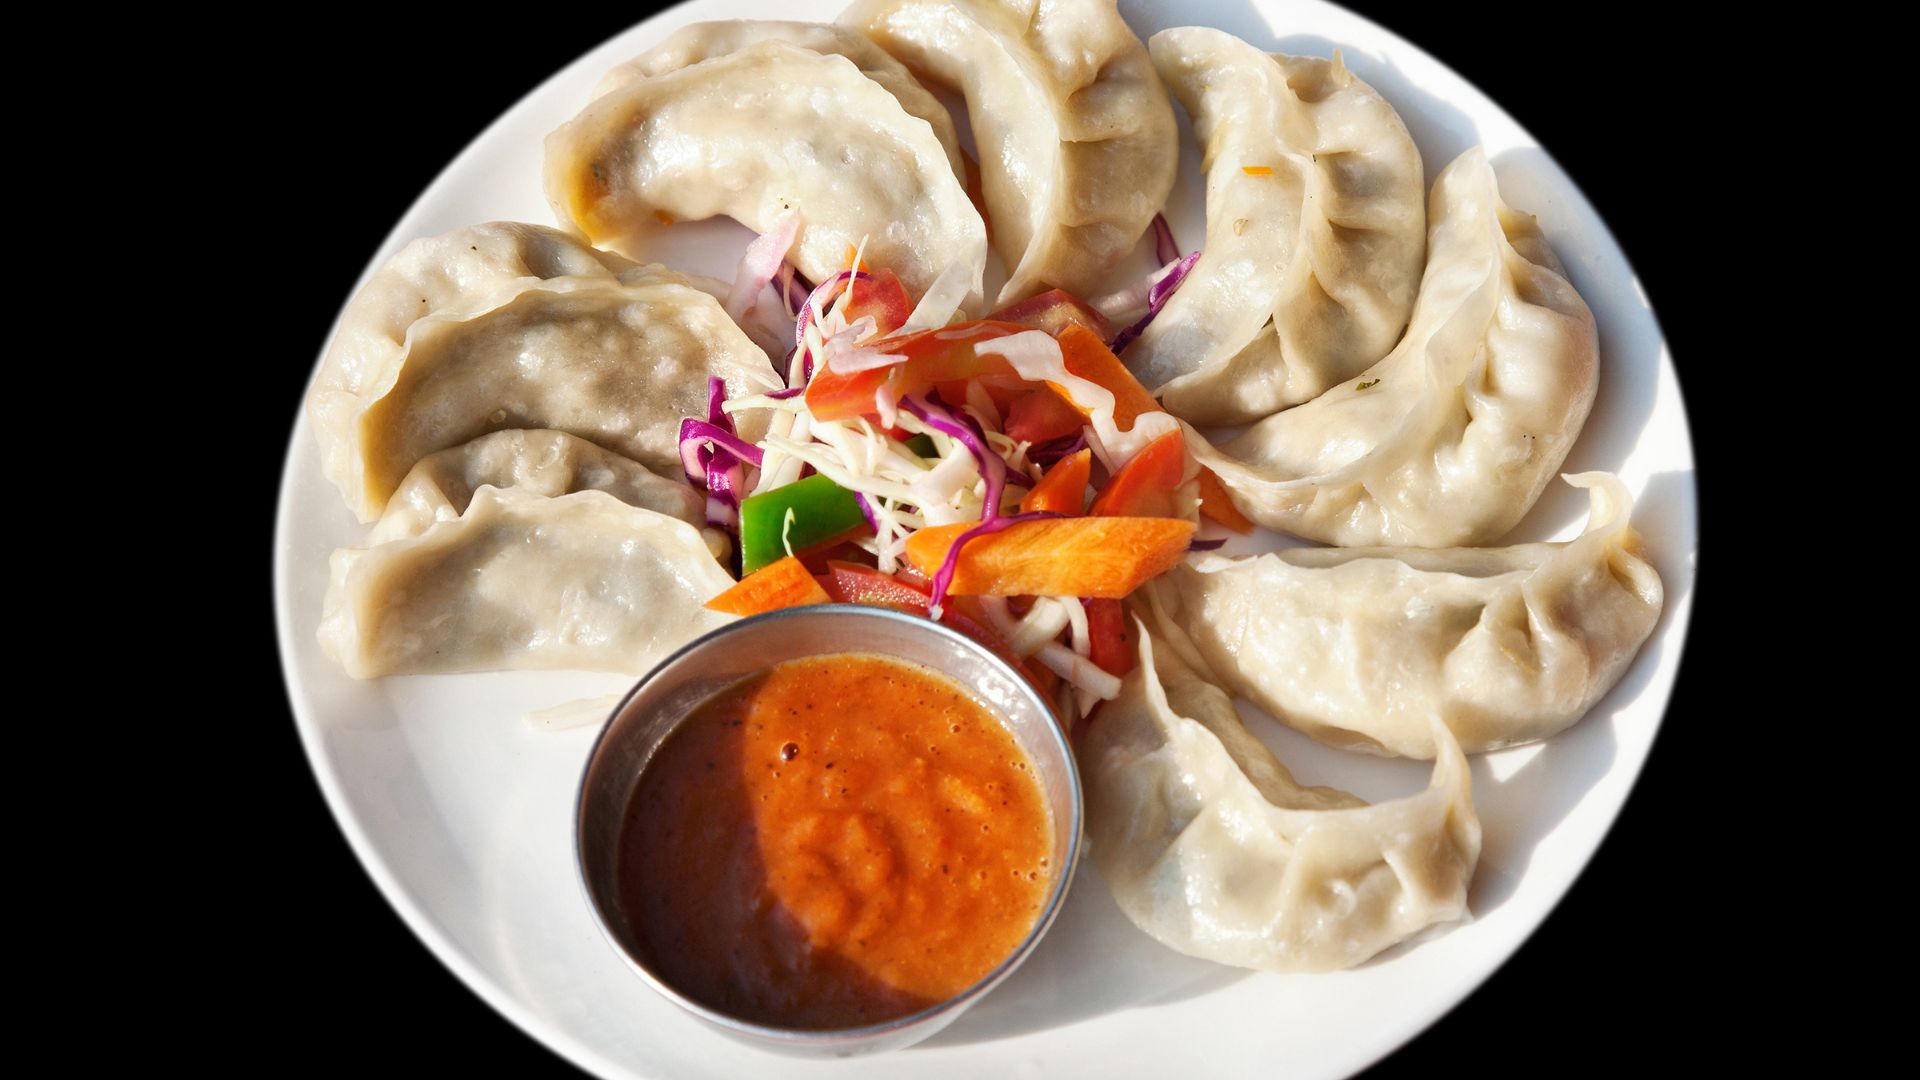 Momos Shop Offers ₹25,000 for Helper Job, Internet Buzzes with Reactions